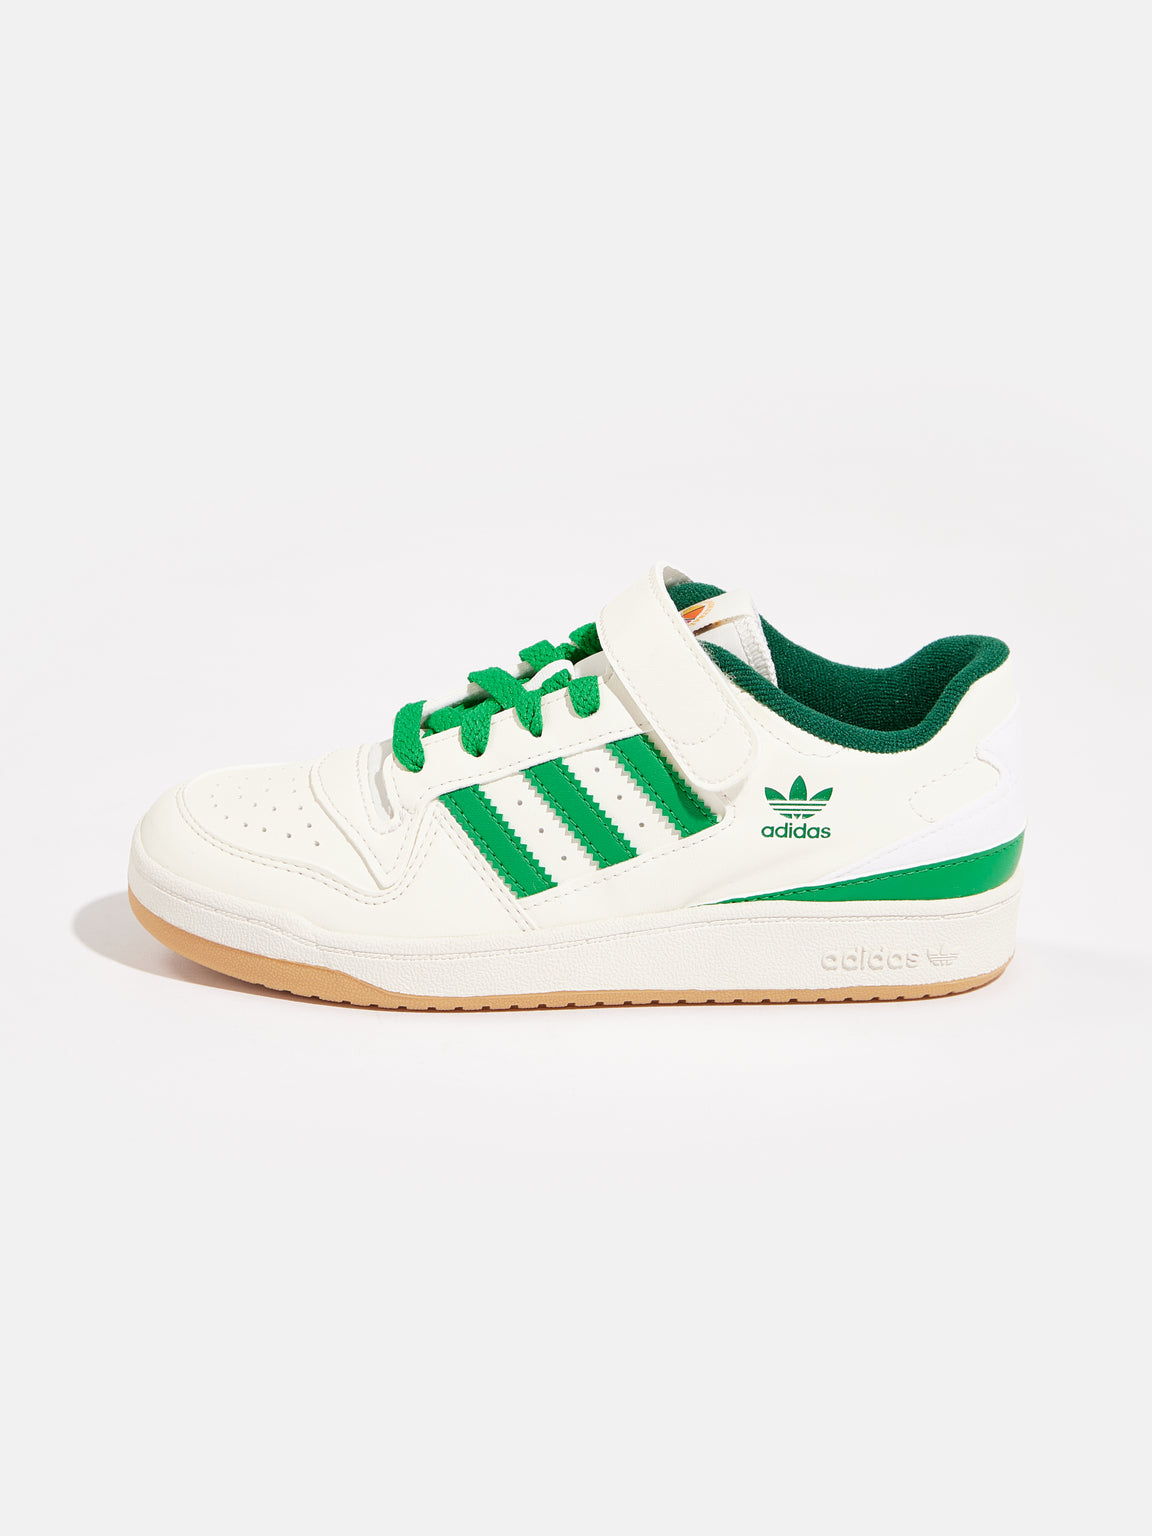 ADIDAS | FORUM LOW C FOR KIDS GREEN